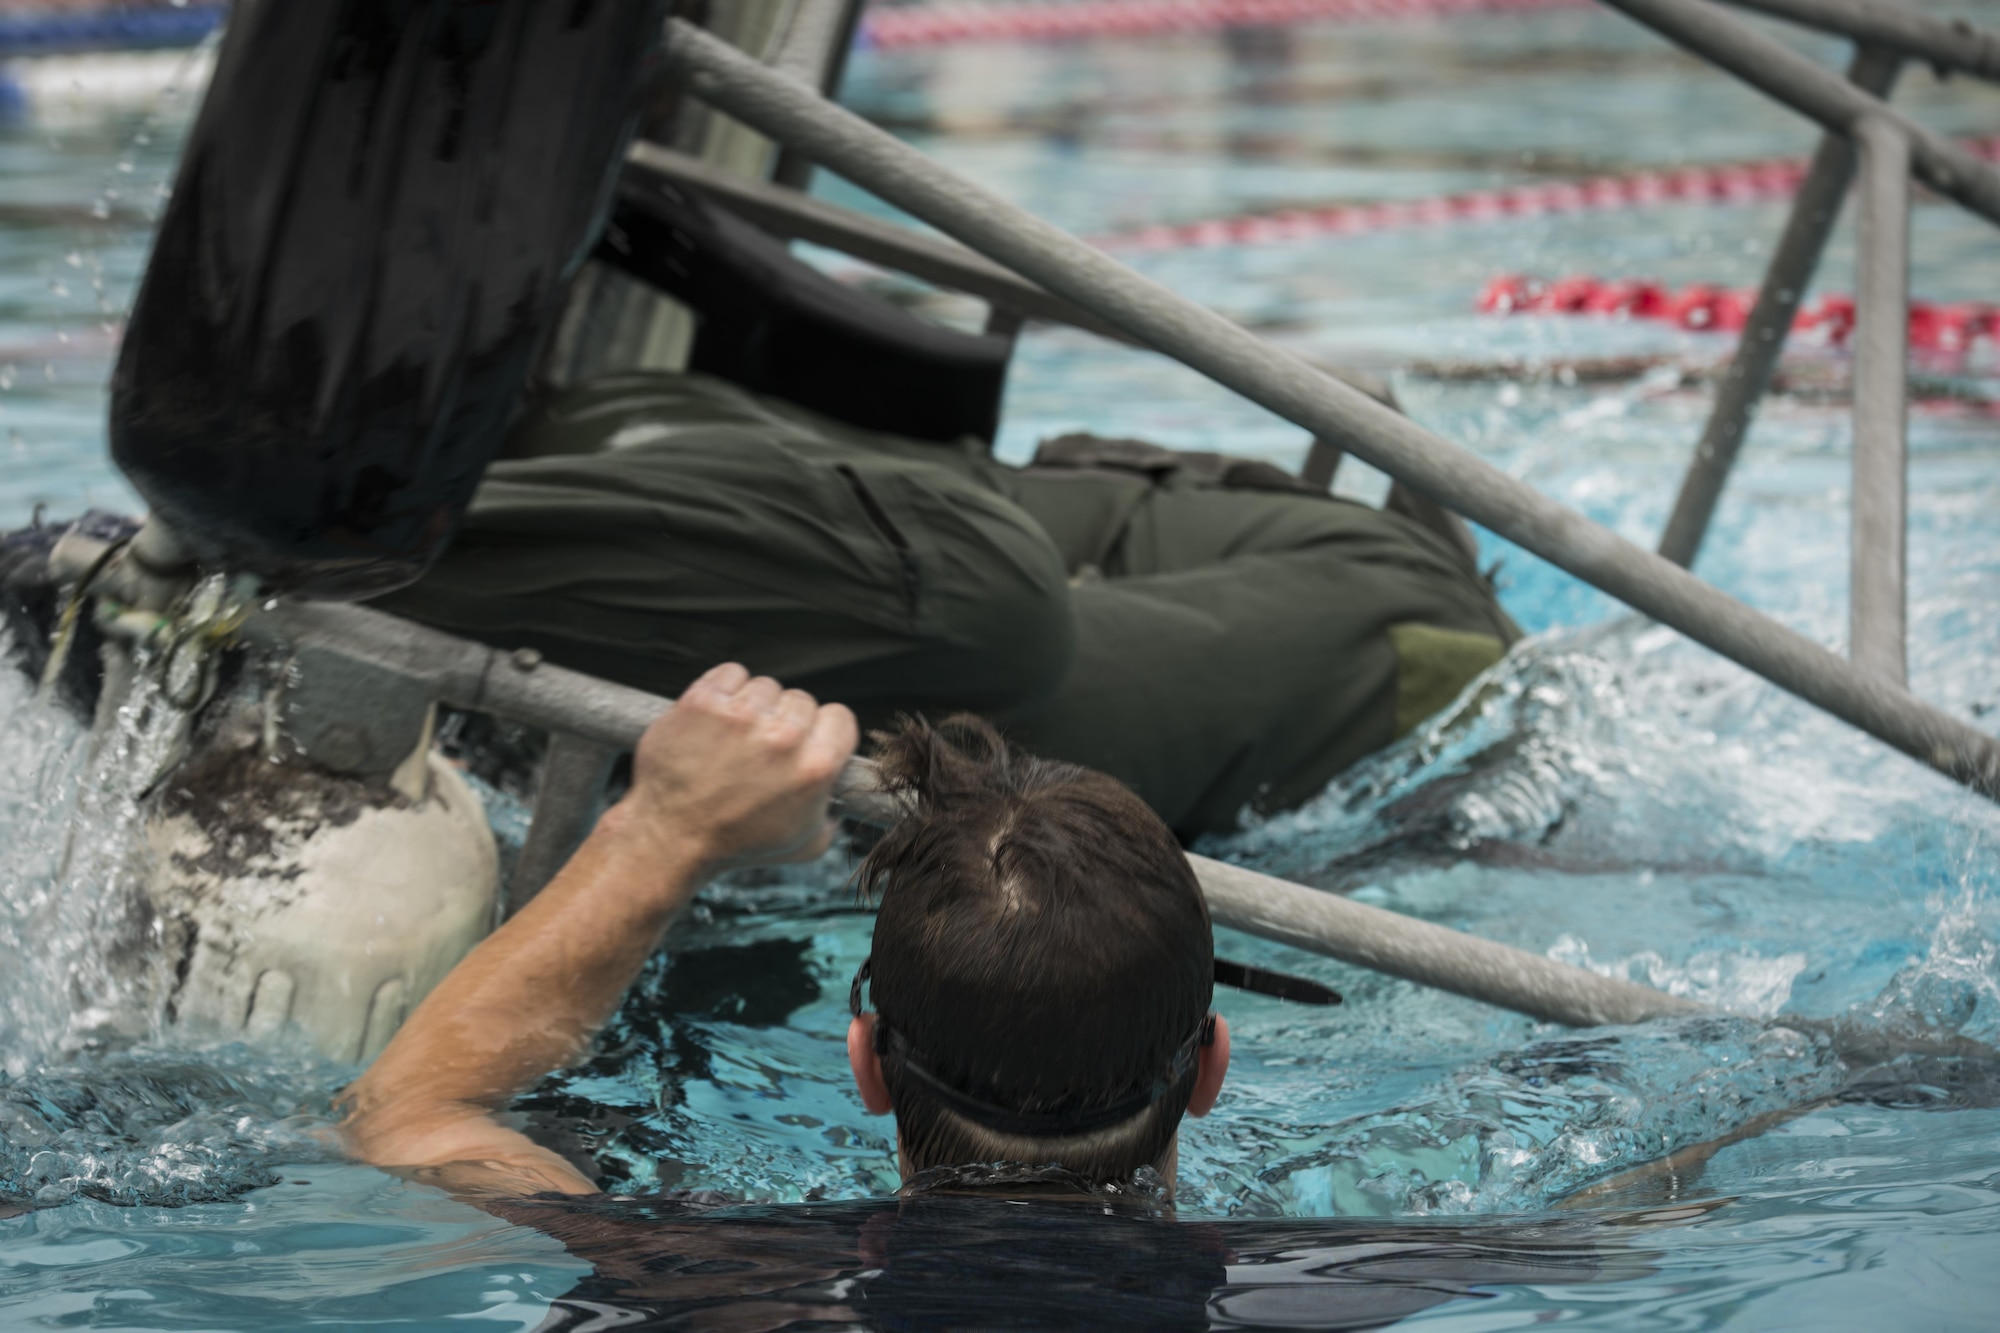 A survival, evasion, resistance and escape specialist with the 1st Special Operations Support Squadron flips a shallow water egress trainer chair during rotary wing water survival training at Hurlburt Field, Fla., July 18, 2017. The SWET chair allows aircrew members to practice escape procedures while submerged under water during a simulated inverted helicopter crash. (U.S. Air Force photo by Airman 1st Class Joseph Pick)